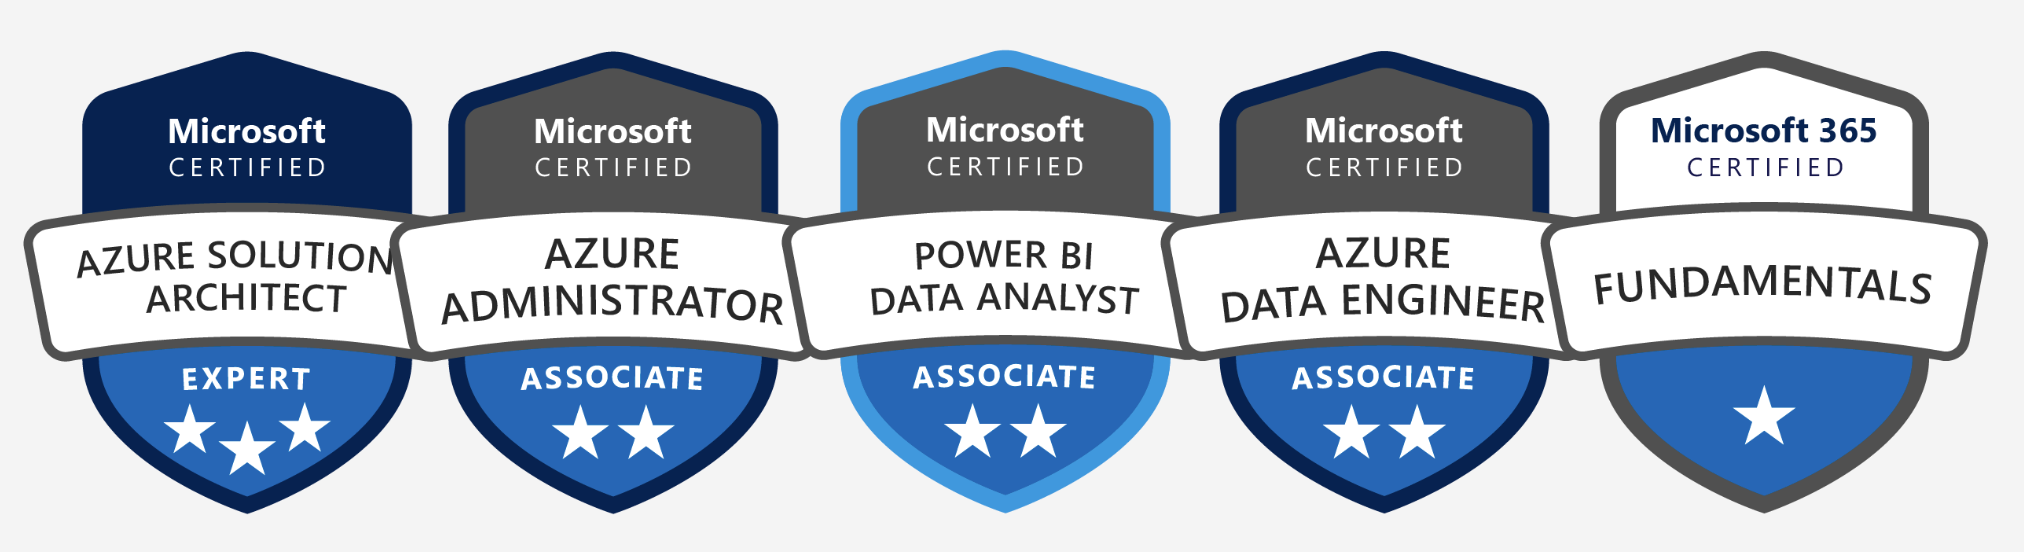 Microsoft azure certifications in our team